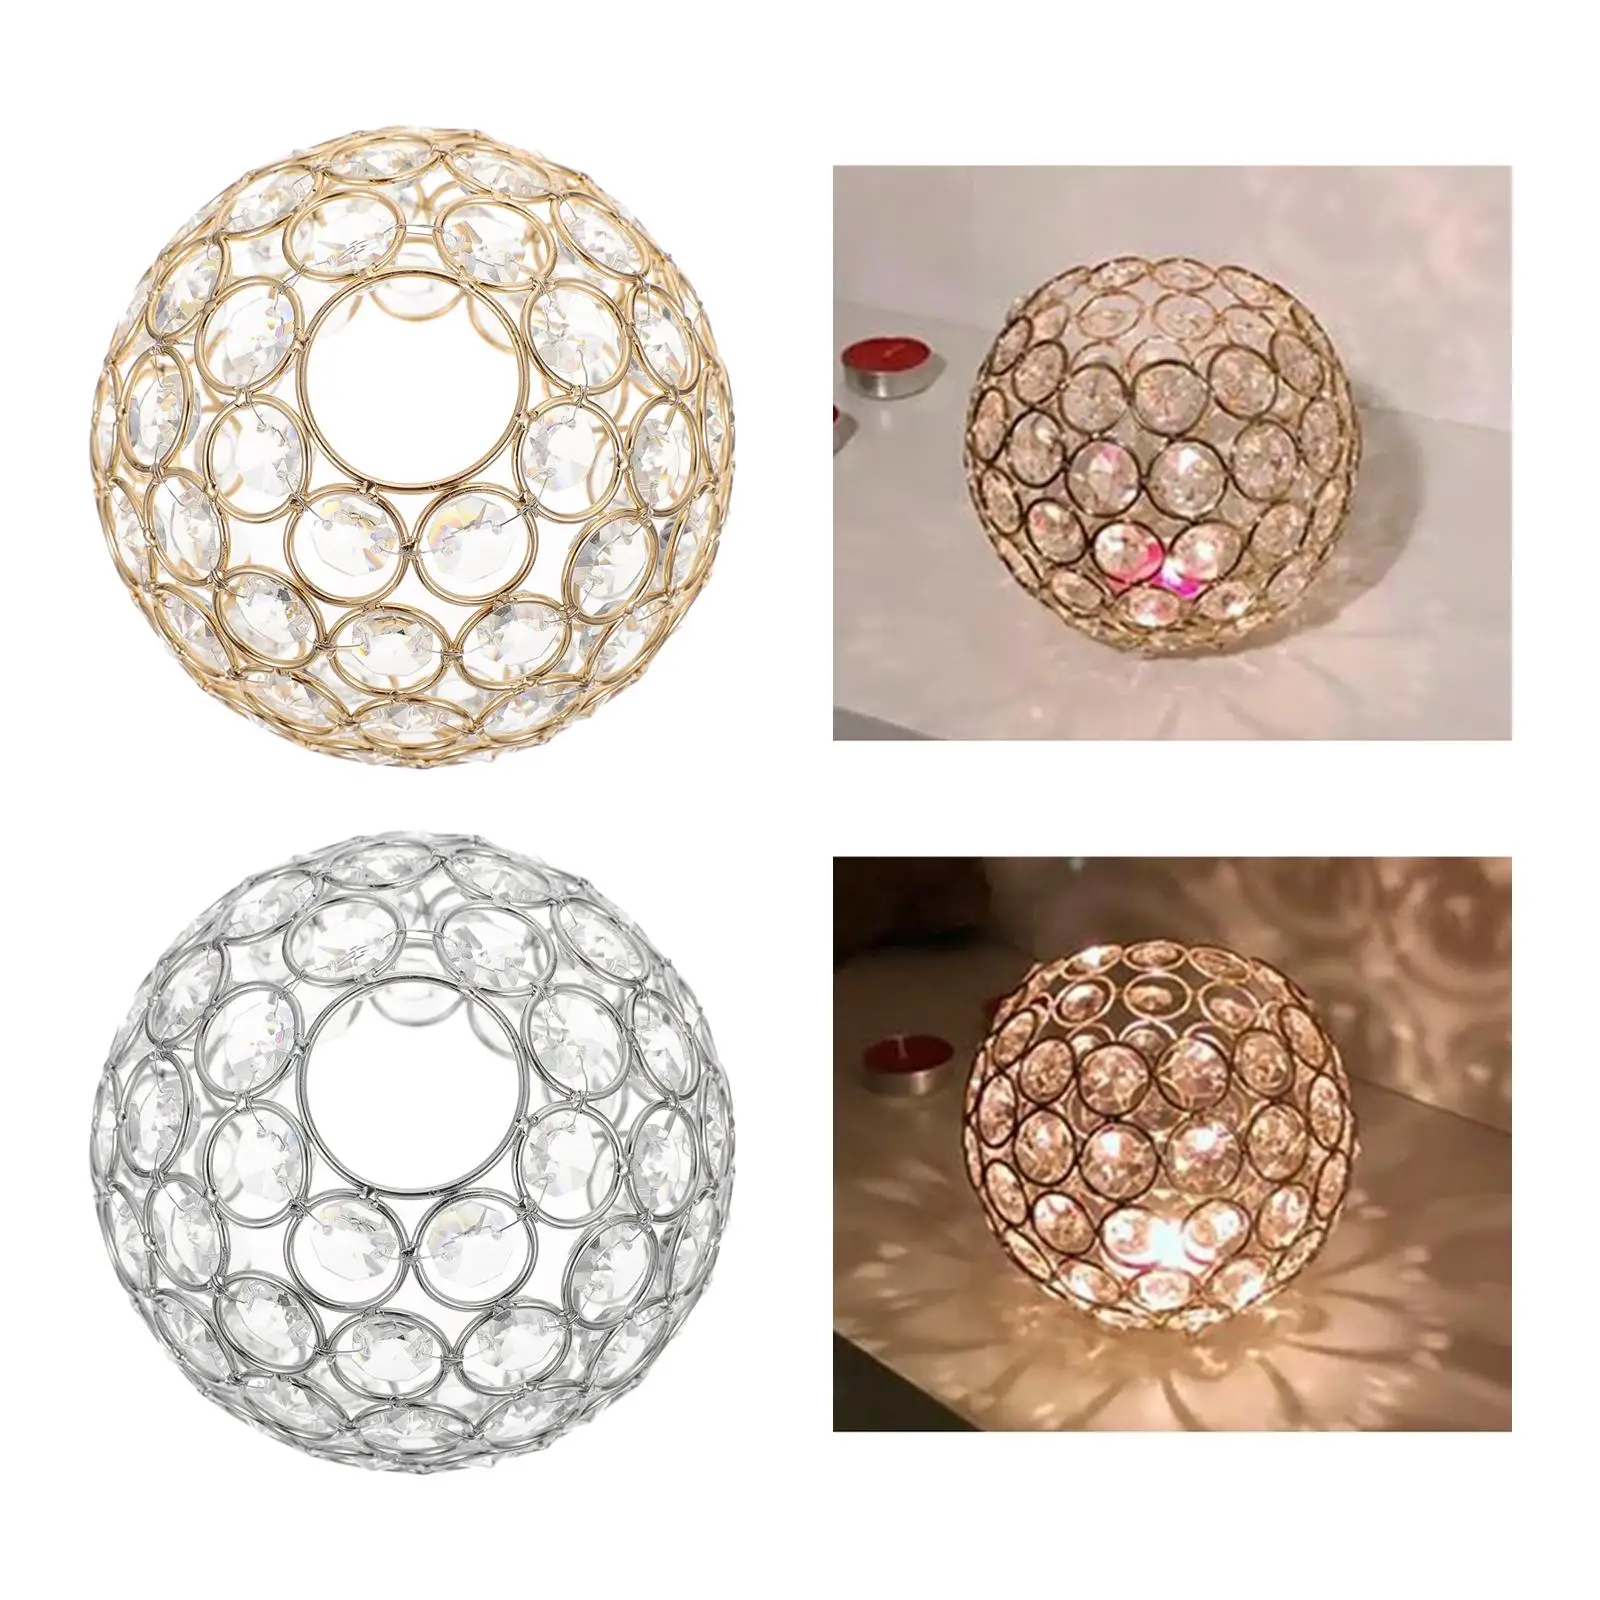 Classic Ceiling Light Shade Replacement Cover Rhinestone Lampshade Fitting Crystal Lampshade for Table Lamp Bedroom College Home